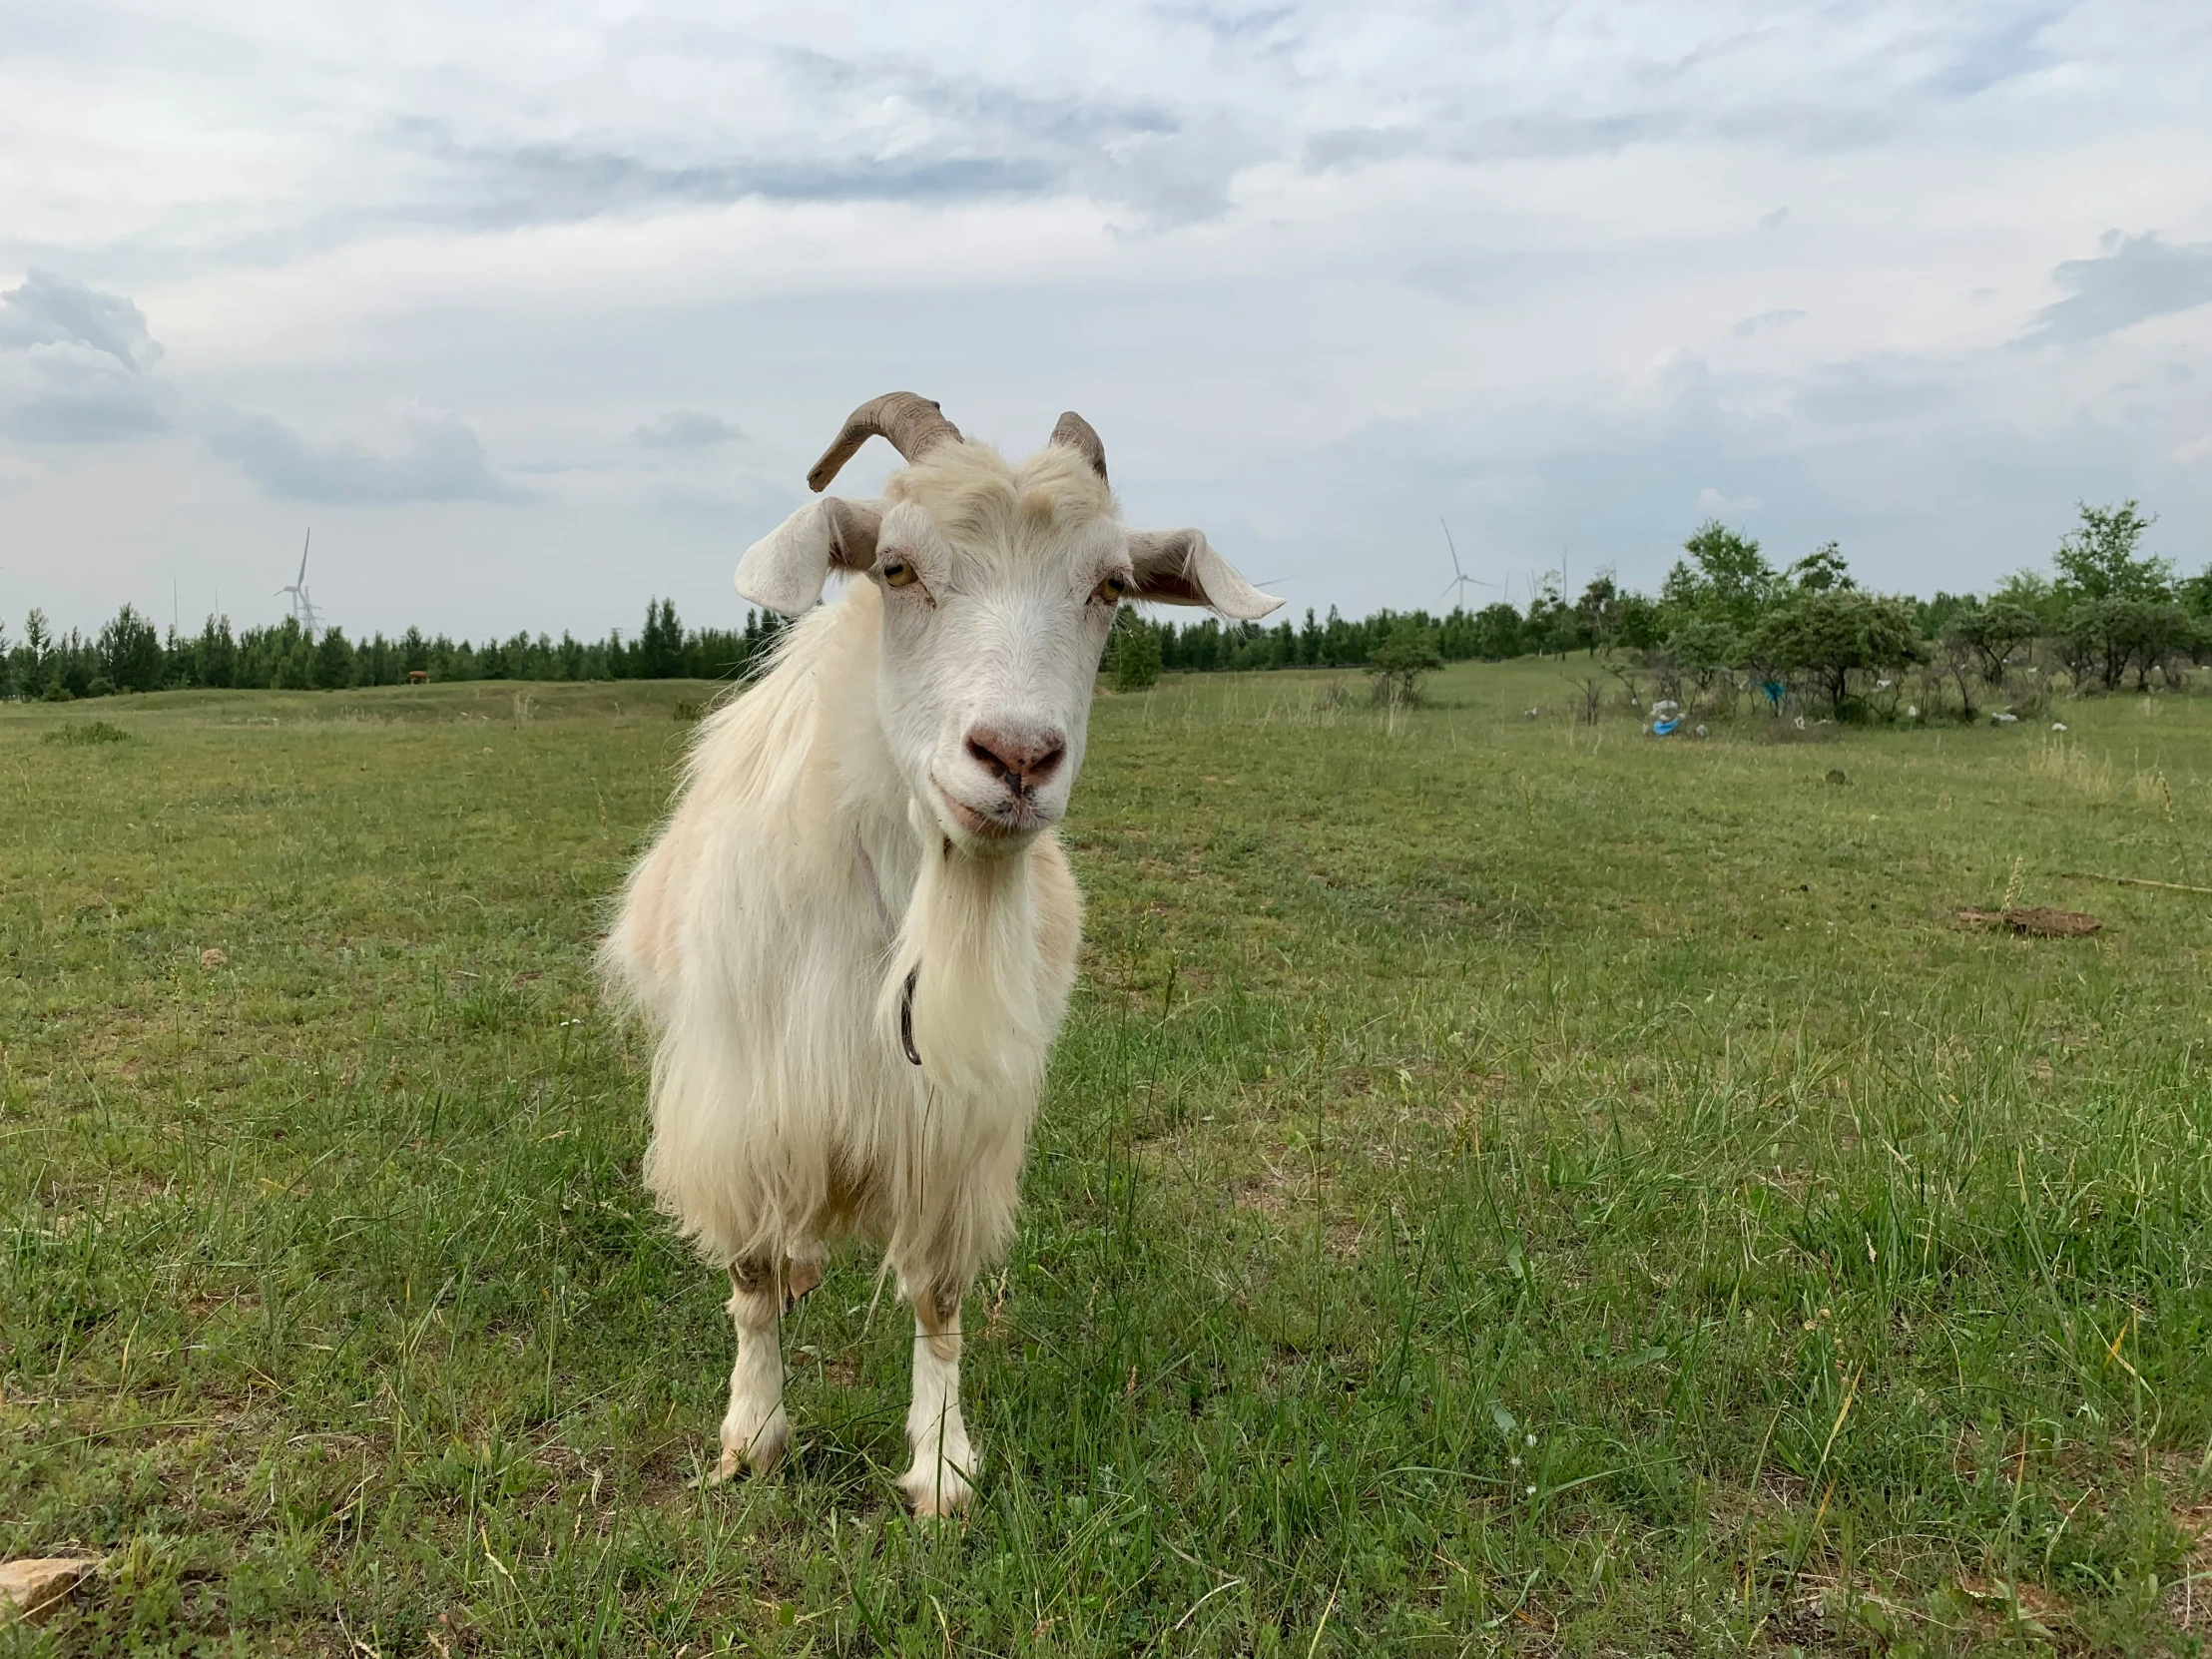 the long horn goat is standing still in a field